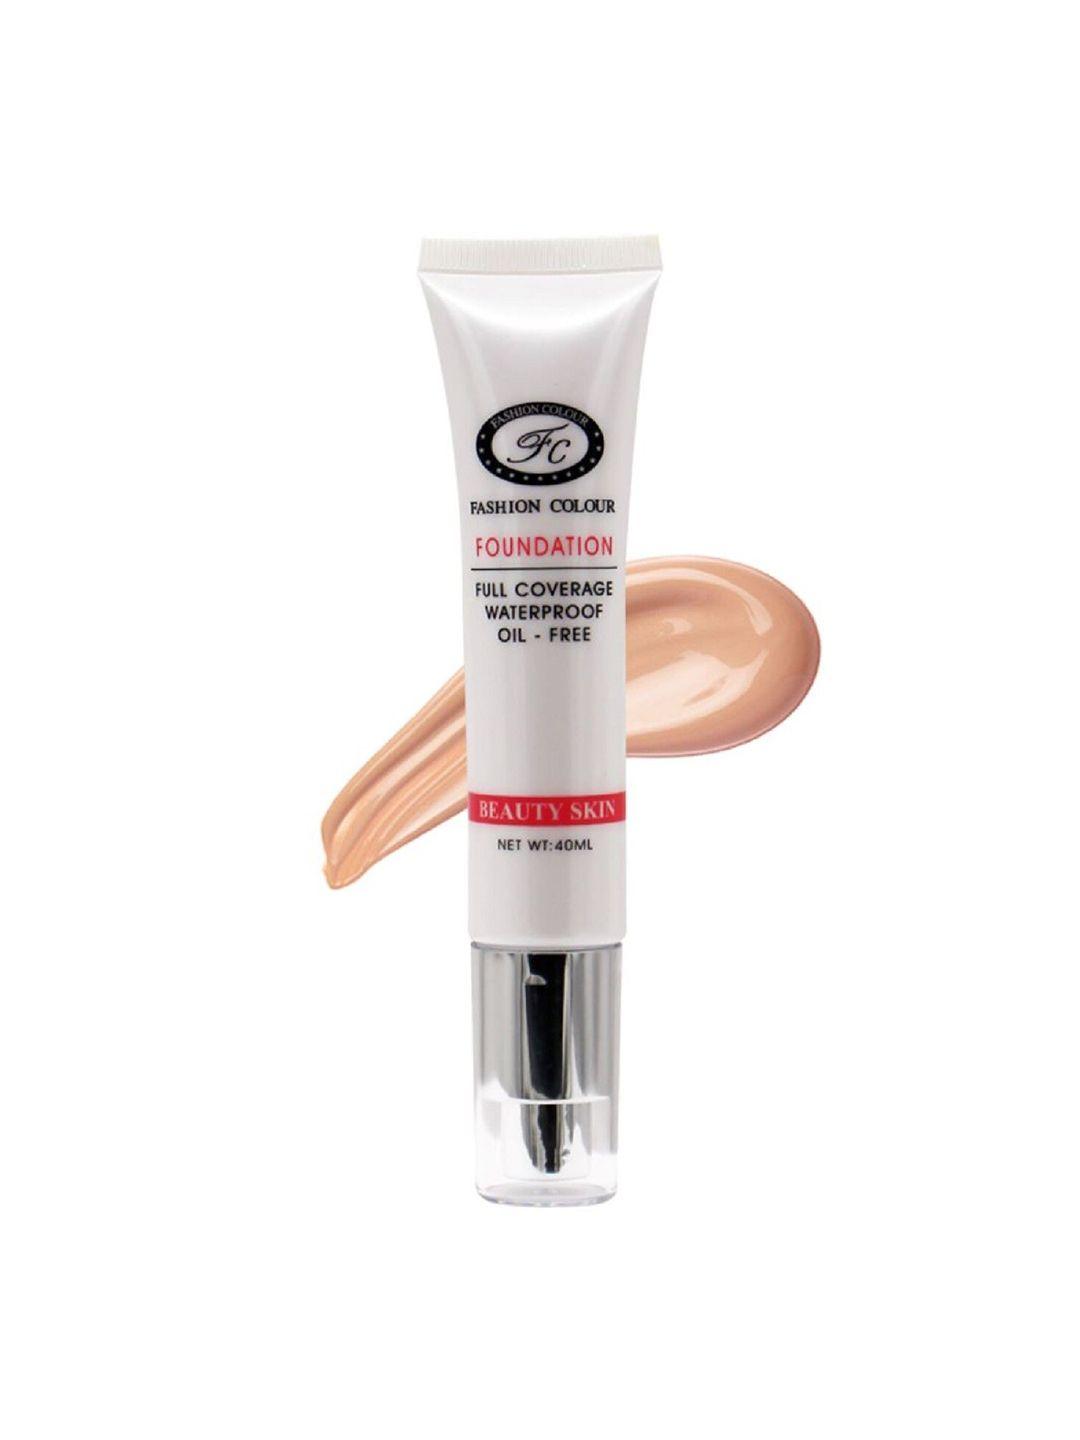 fashion-colour-beauty-skin-oil-free-waterproof-full-coverage-foundation-40-ml---shade-03